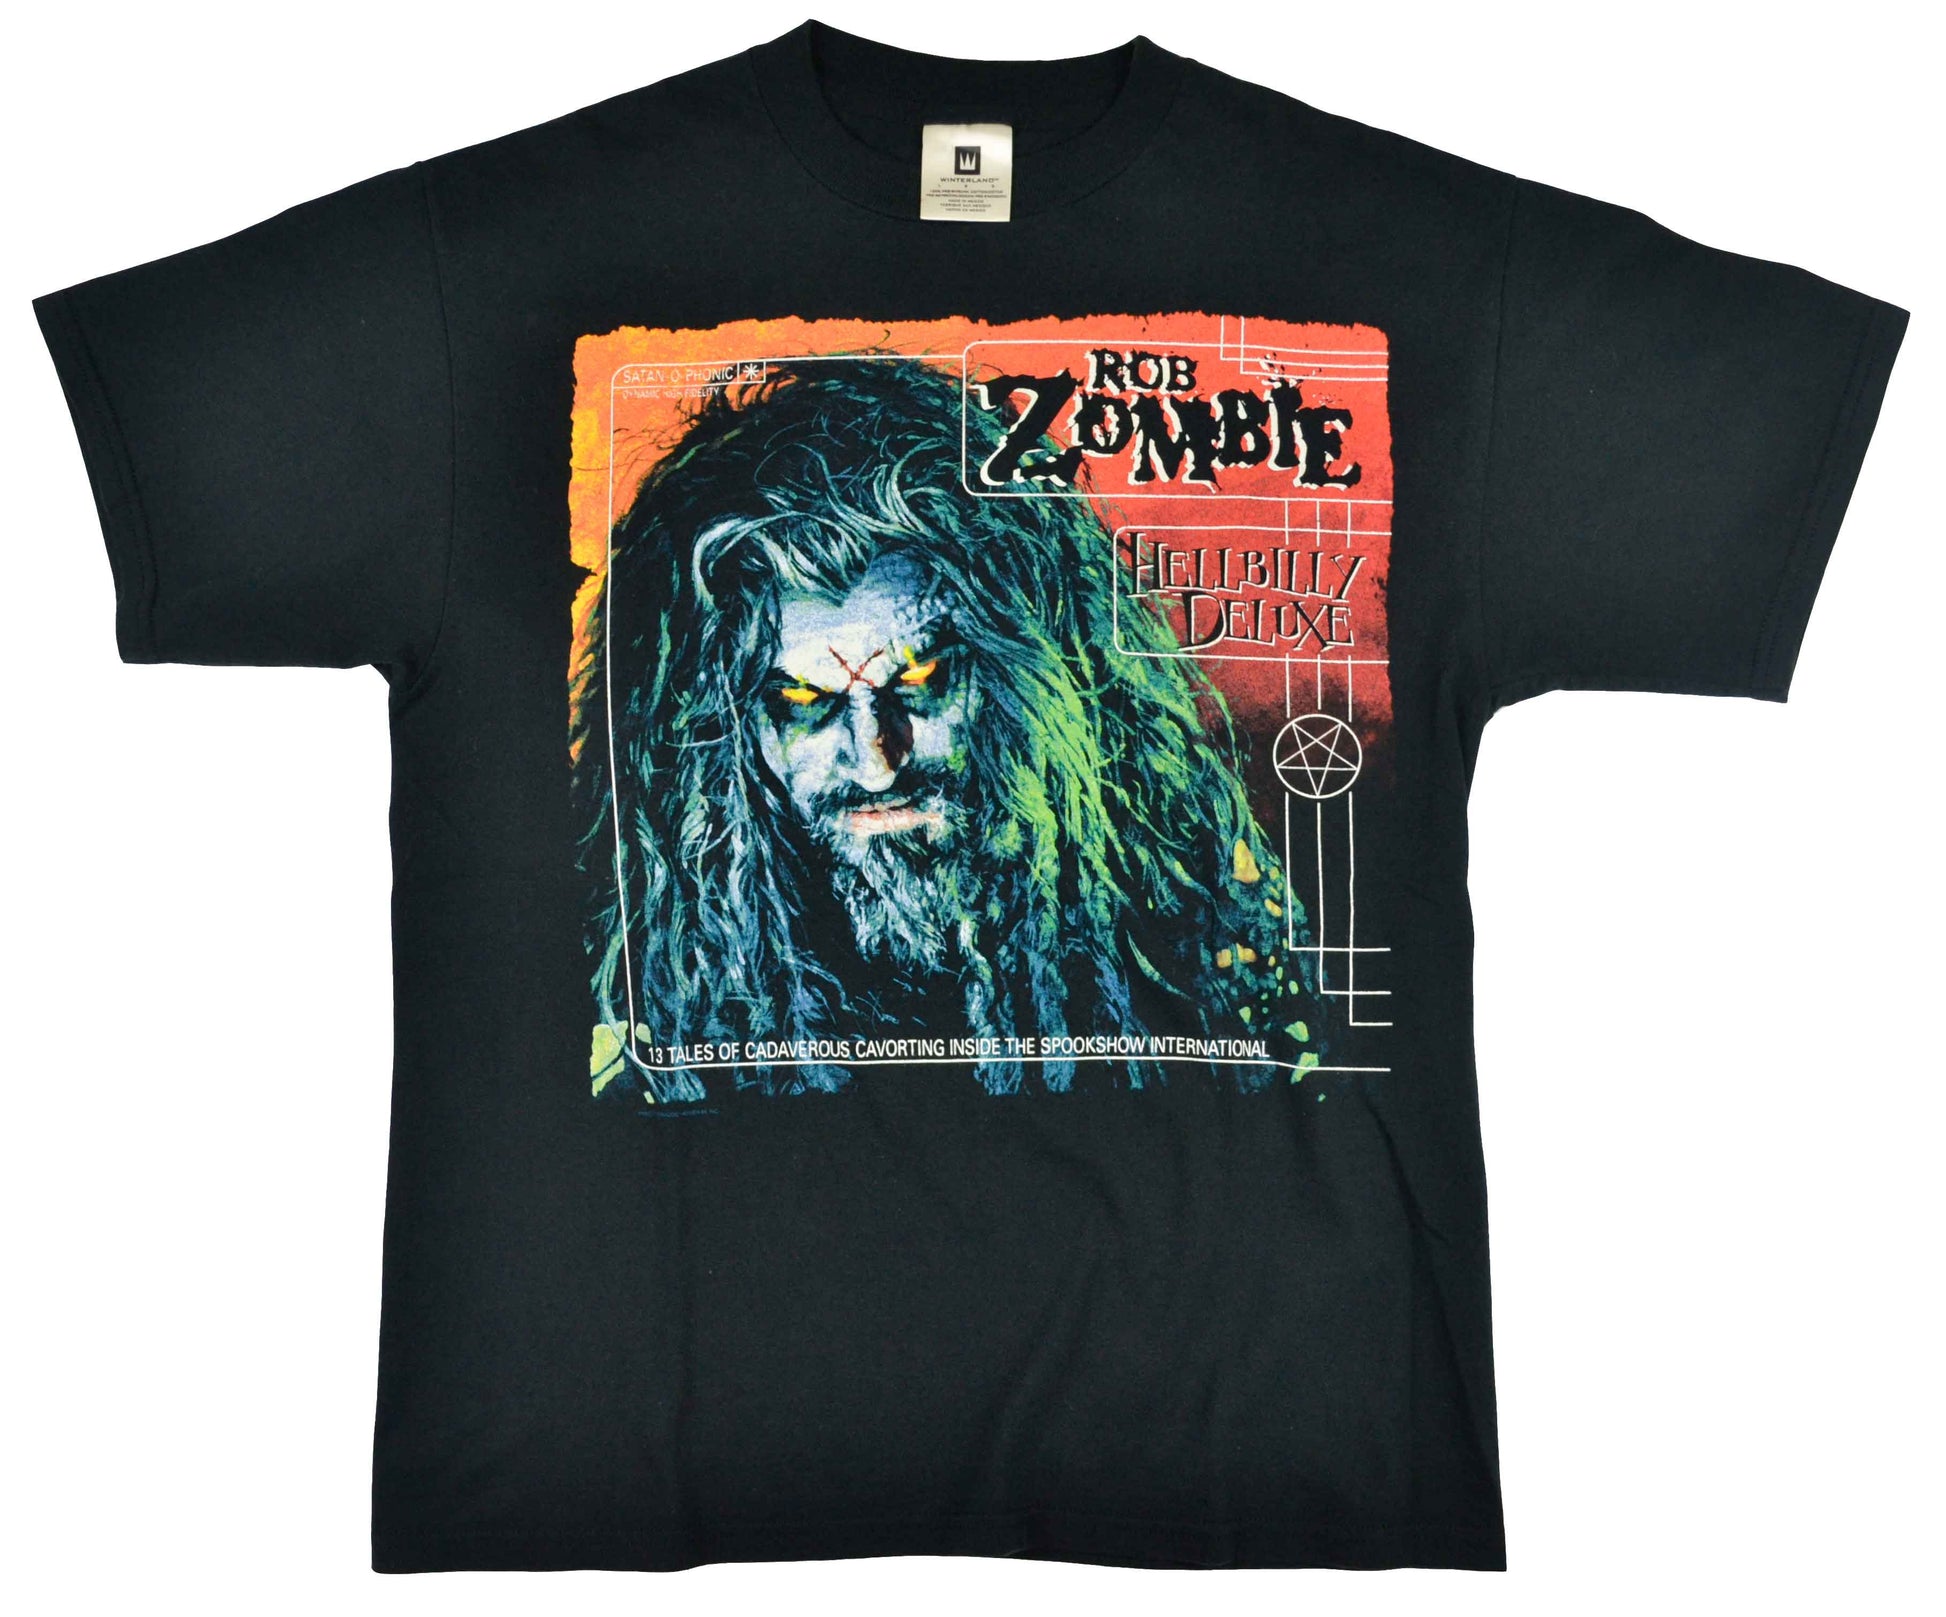 Vintage Rob Zombie 1998 "Hellbilly Deluxe" Band Shirt  "Great things come out of being hungry and cold. Once you're pampered, you get lazy". This shirt comes from his first solo album "Hellbilly Studio". Zombie's music has been described as "melding metal with industrial, hypnotic rhythms and haunting sounds". ﻿A fun fact is that Rob is vegan. The tee has a cool vintage look.